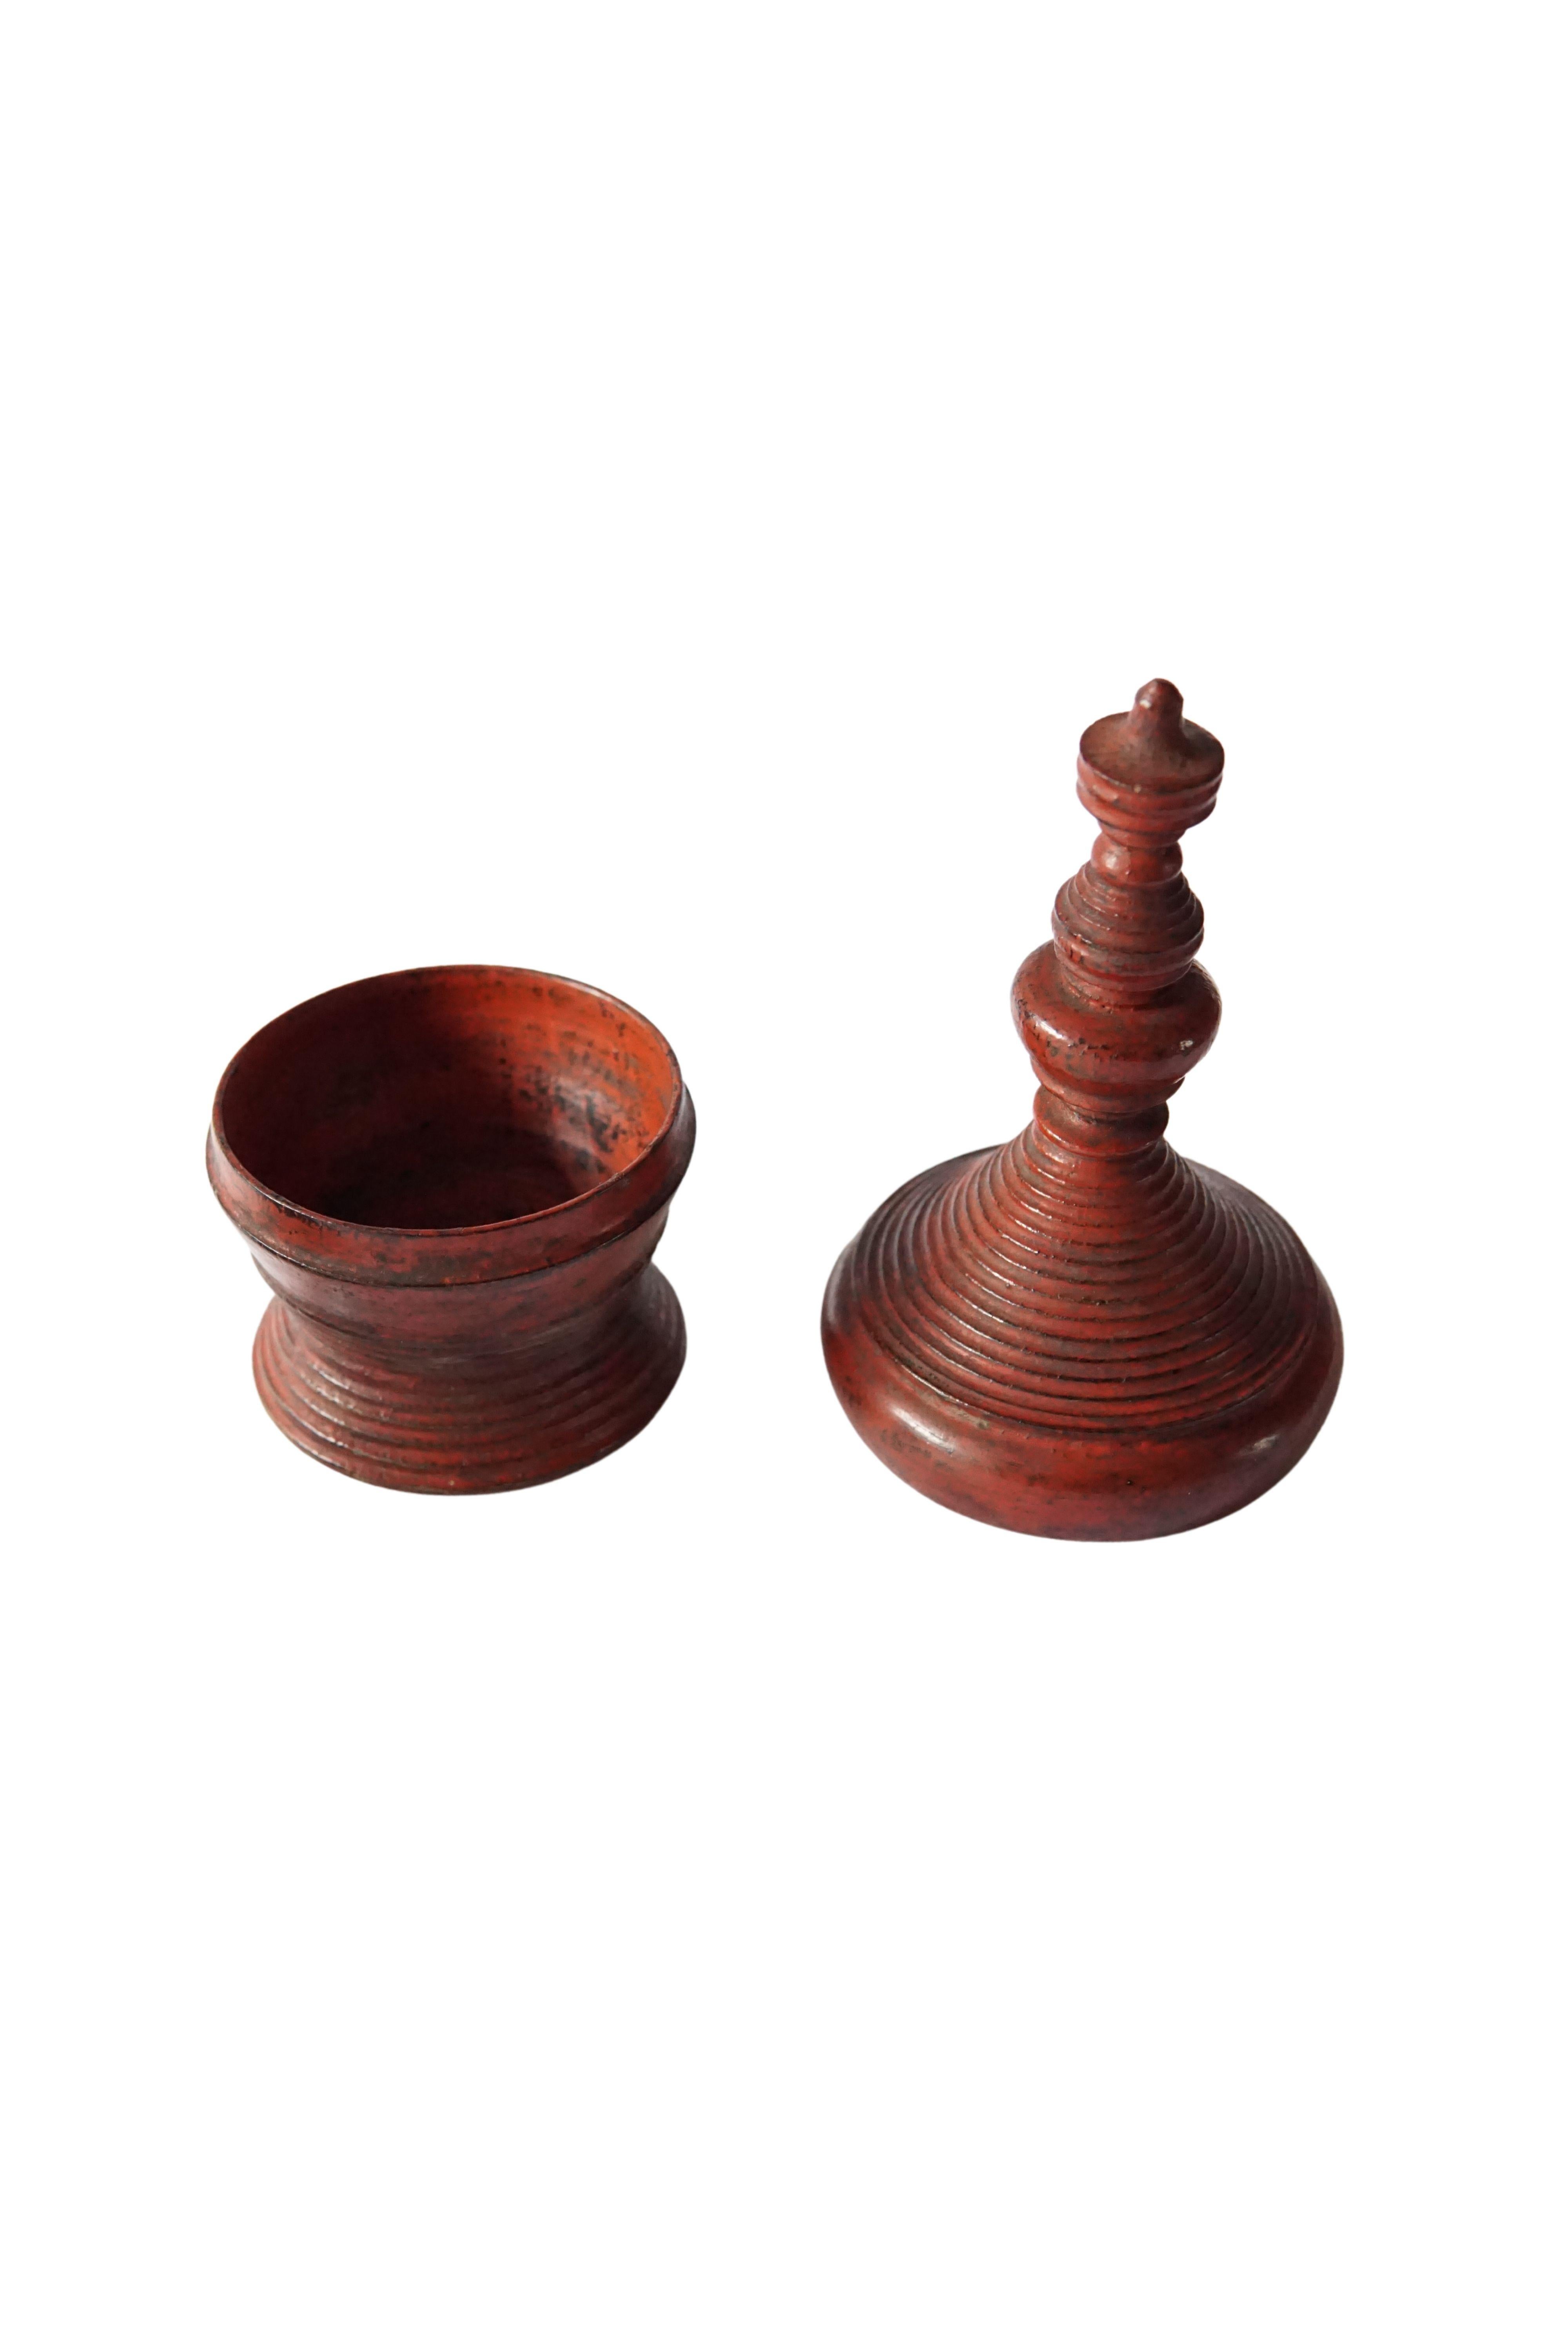 Hand-Crafted Pair of Small Burmese Lacquer Offering Vessels, 